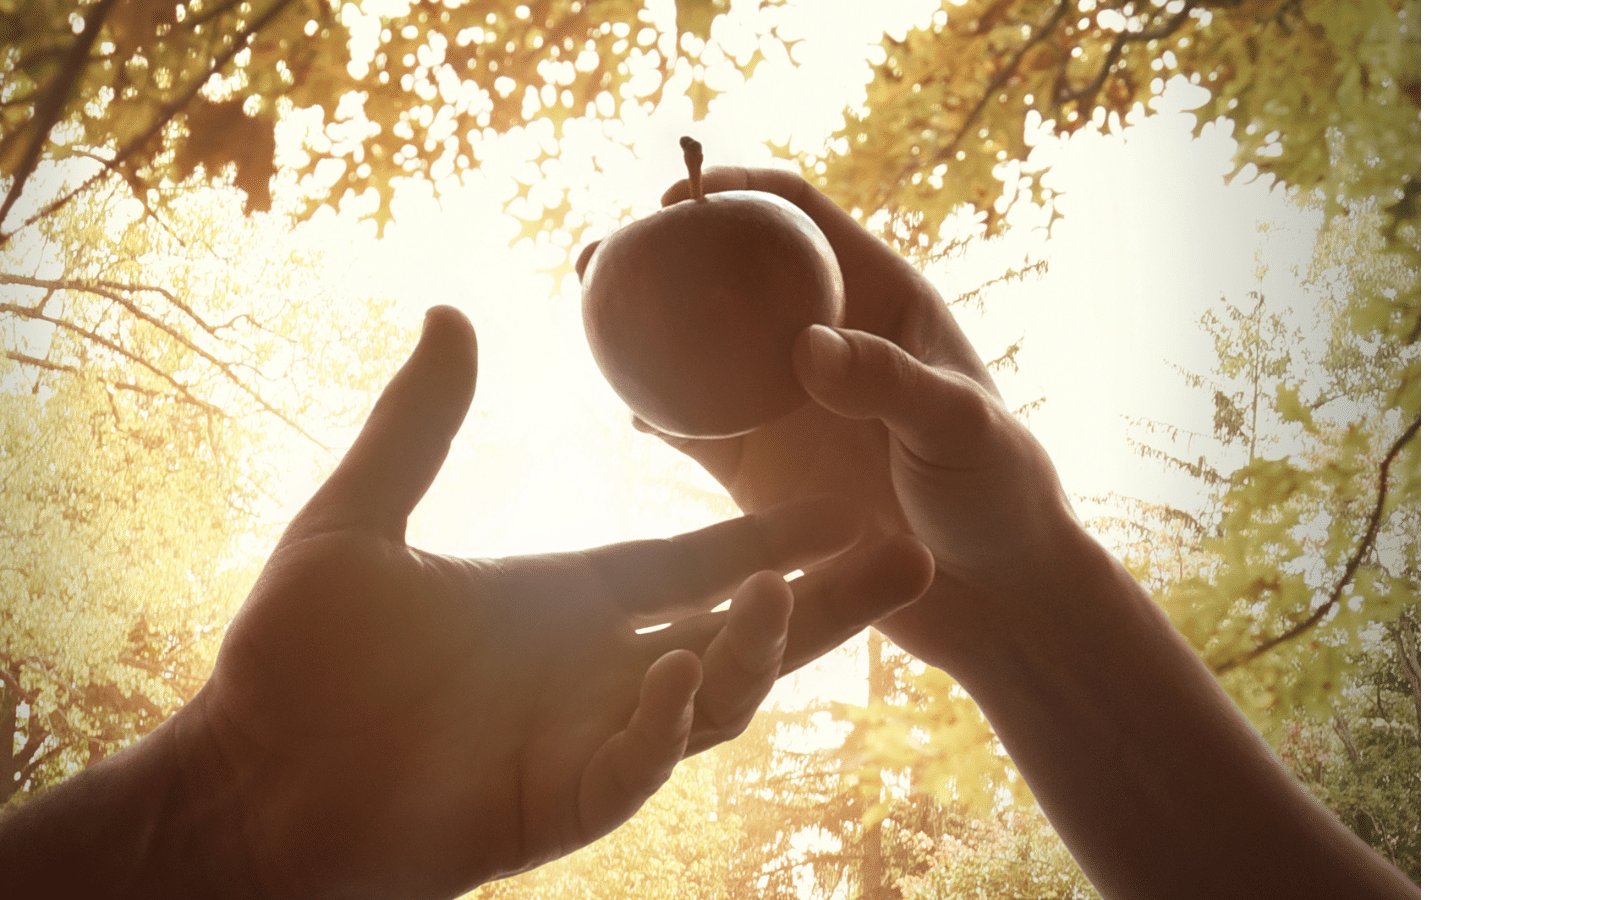 A womans hand passing an apple to a man's hand in a garden.